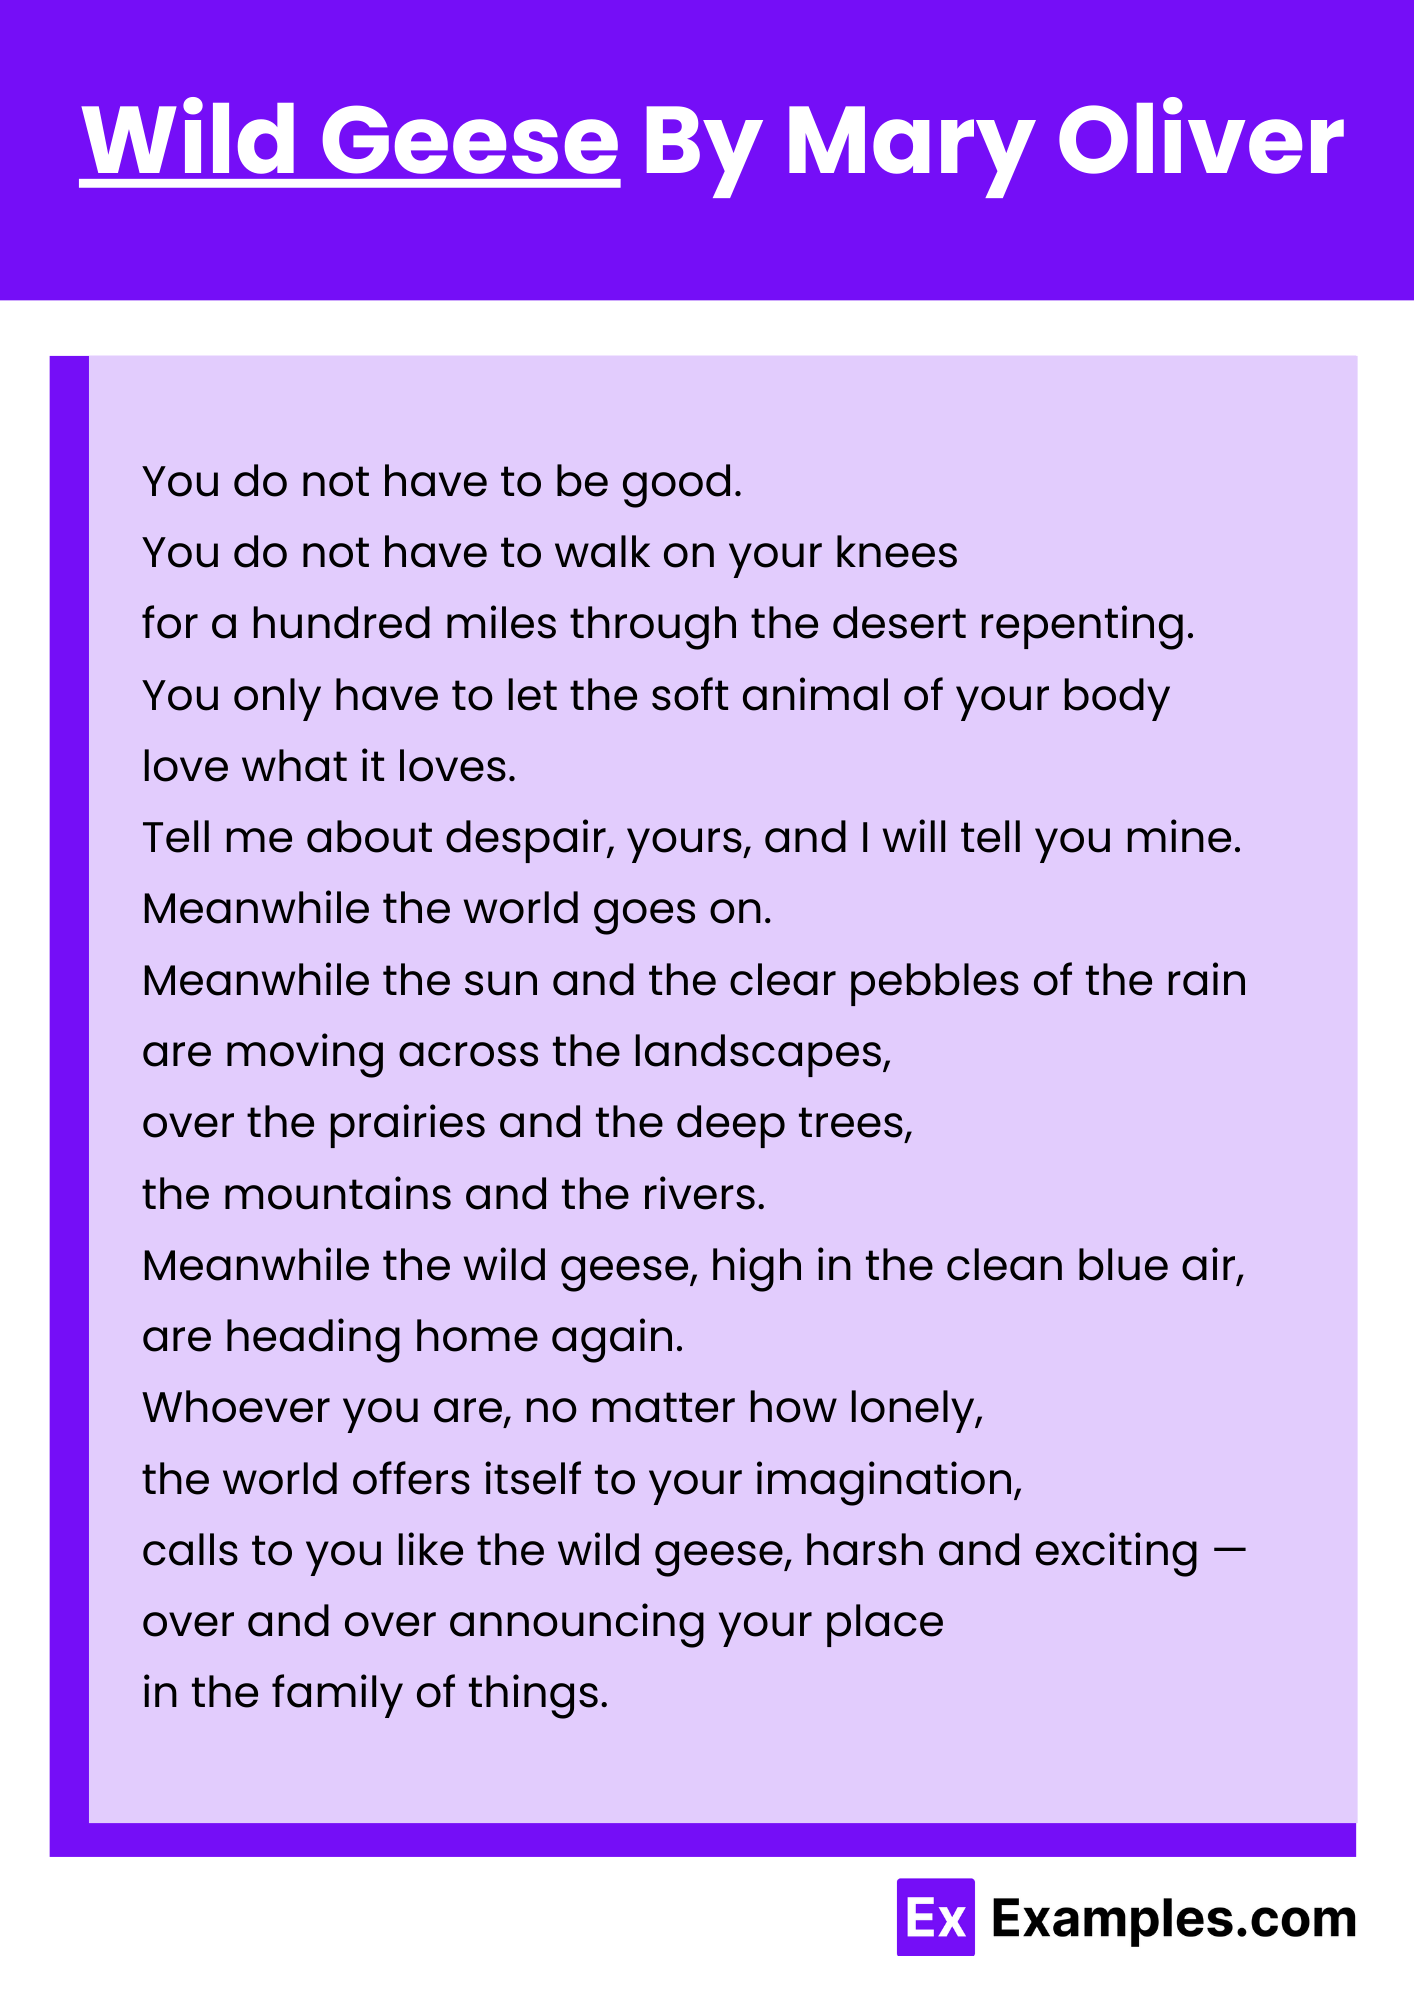 Wild Geese By Mary Oliver